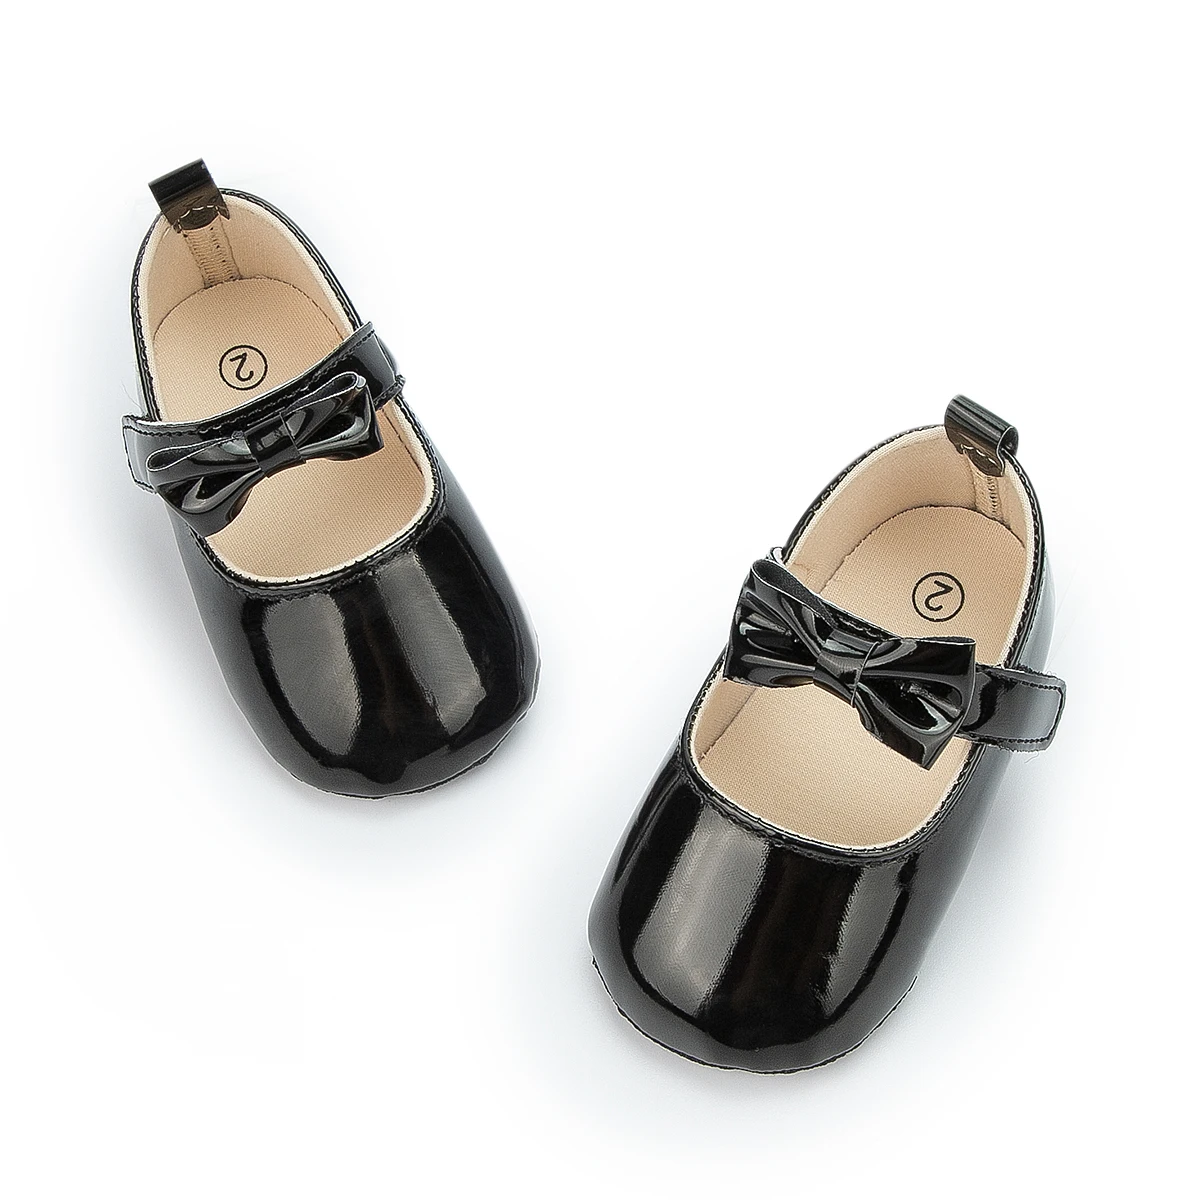 New Arrival Summer Pu Leather Bowknot Dress 0 18 Months Prince Party Baby Girl Shoes